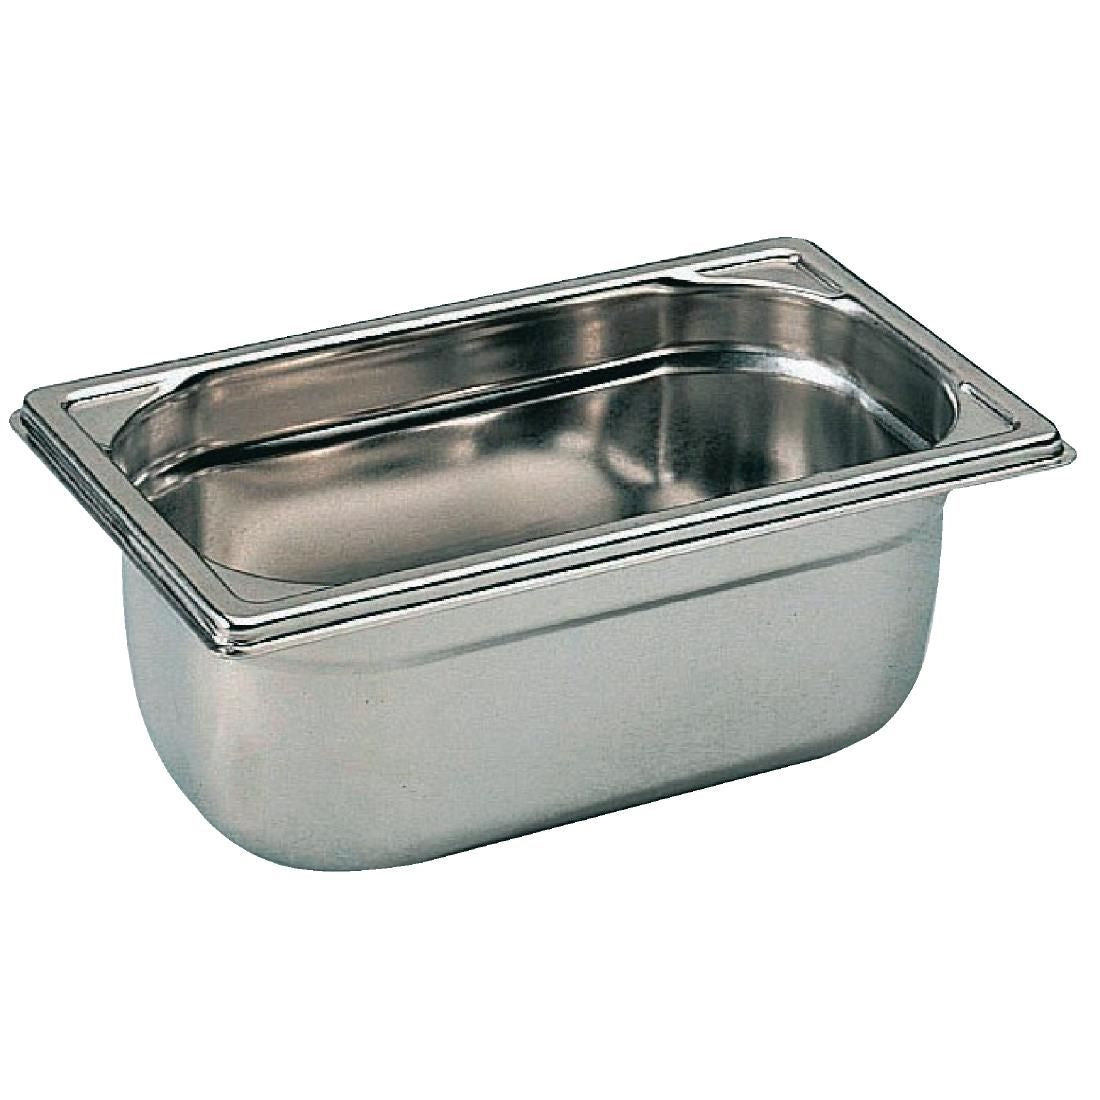 Bourgeat Stainless Steel 1/4 Gastronorm Pan 100mm JD Catering Equipment Solutions Ltd